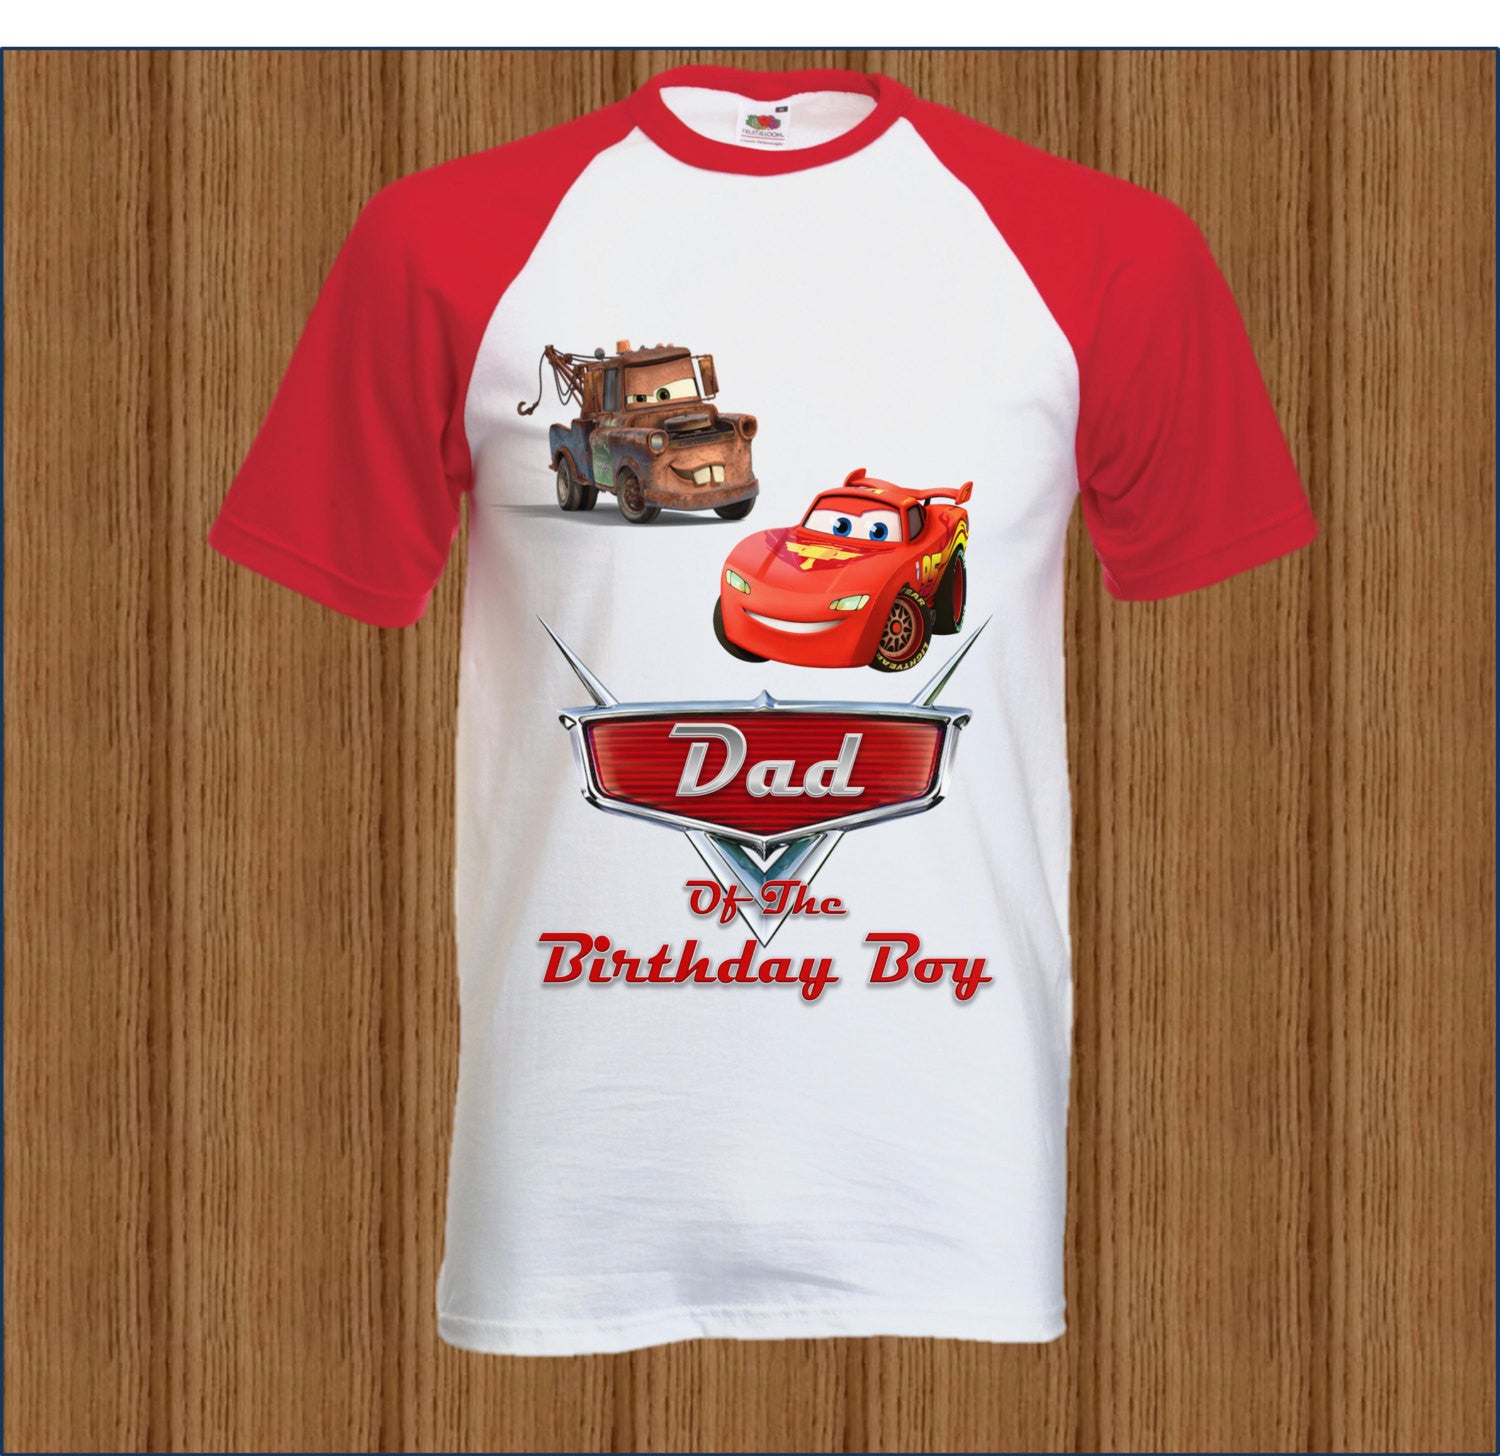 disney cars t shirts for adults